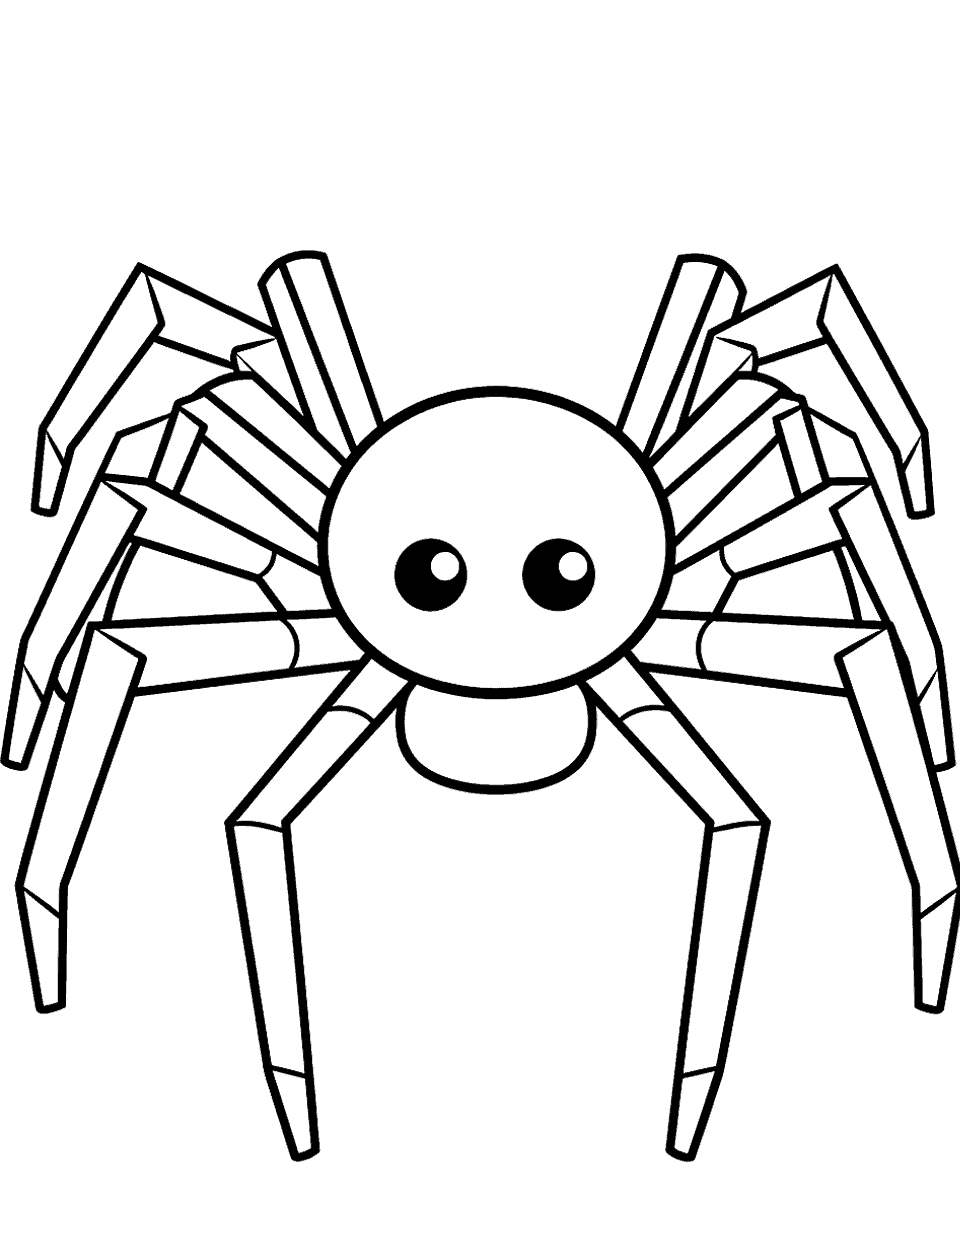 Minecraft Style Spider Coloring Page - A blocky spider inspired by Minecraft graphics.